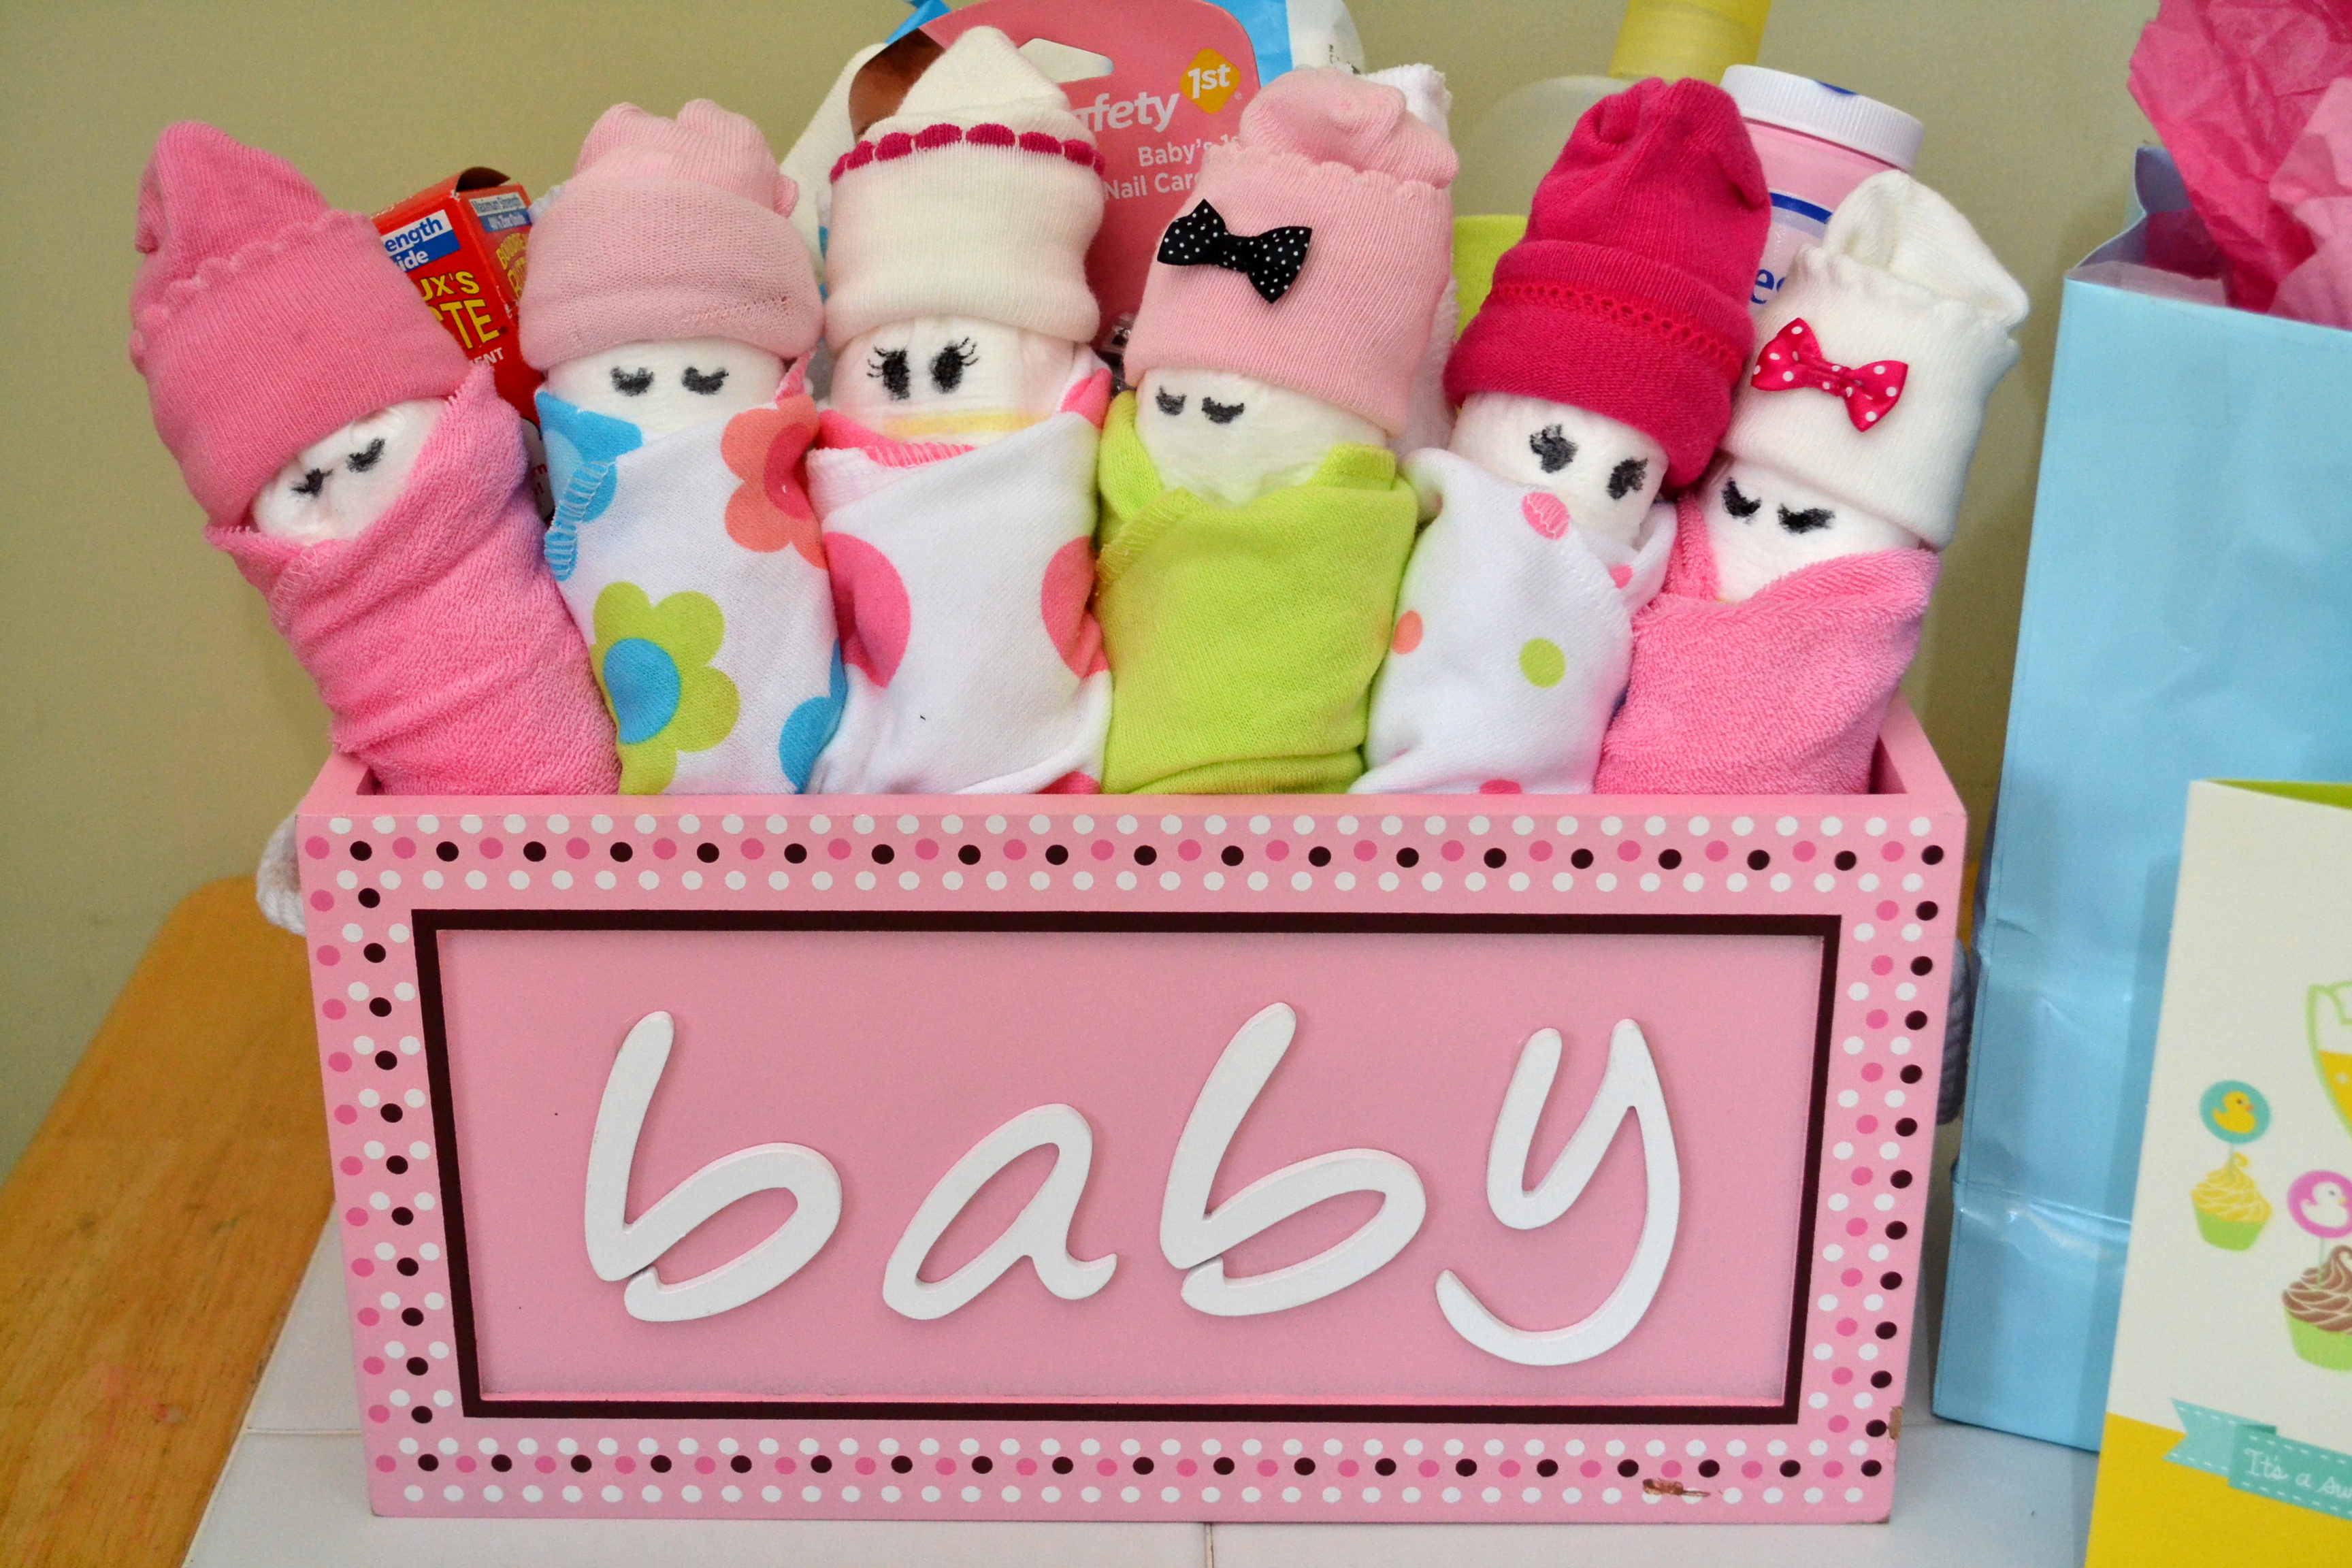 Full Size of Baby Shower:enamour Baby Shower Gifts For Guests Picture Ideas Baby Shower Gifts For Guests Throwing A Baby Shower Ideas Baby Shower Arreglos Baby Shower Niño Baby Favors Baby Shower Photos Baby Shower Quotes Essential Baby Shower Gifts Diy Babies